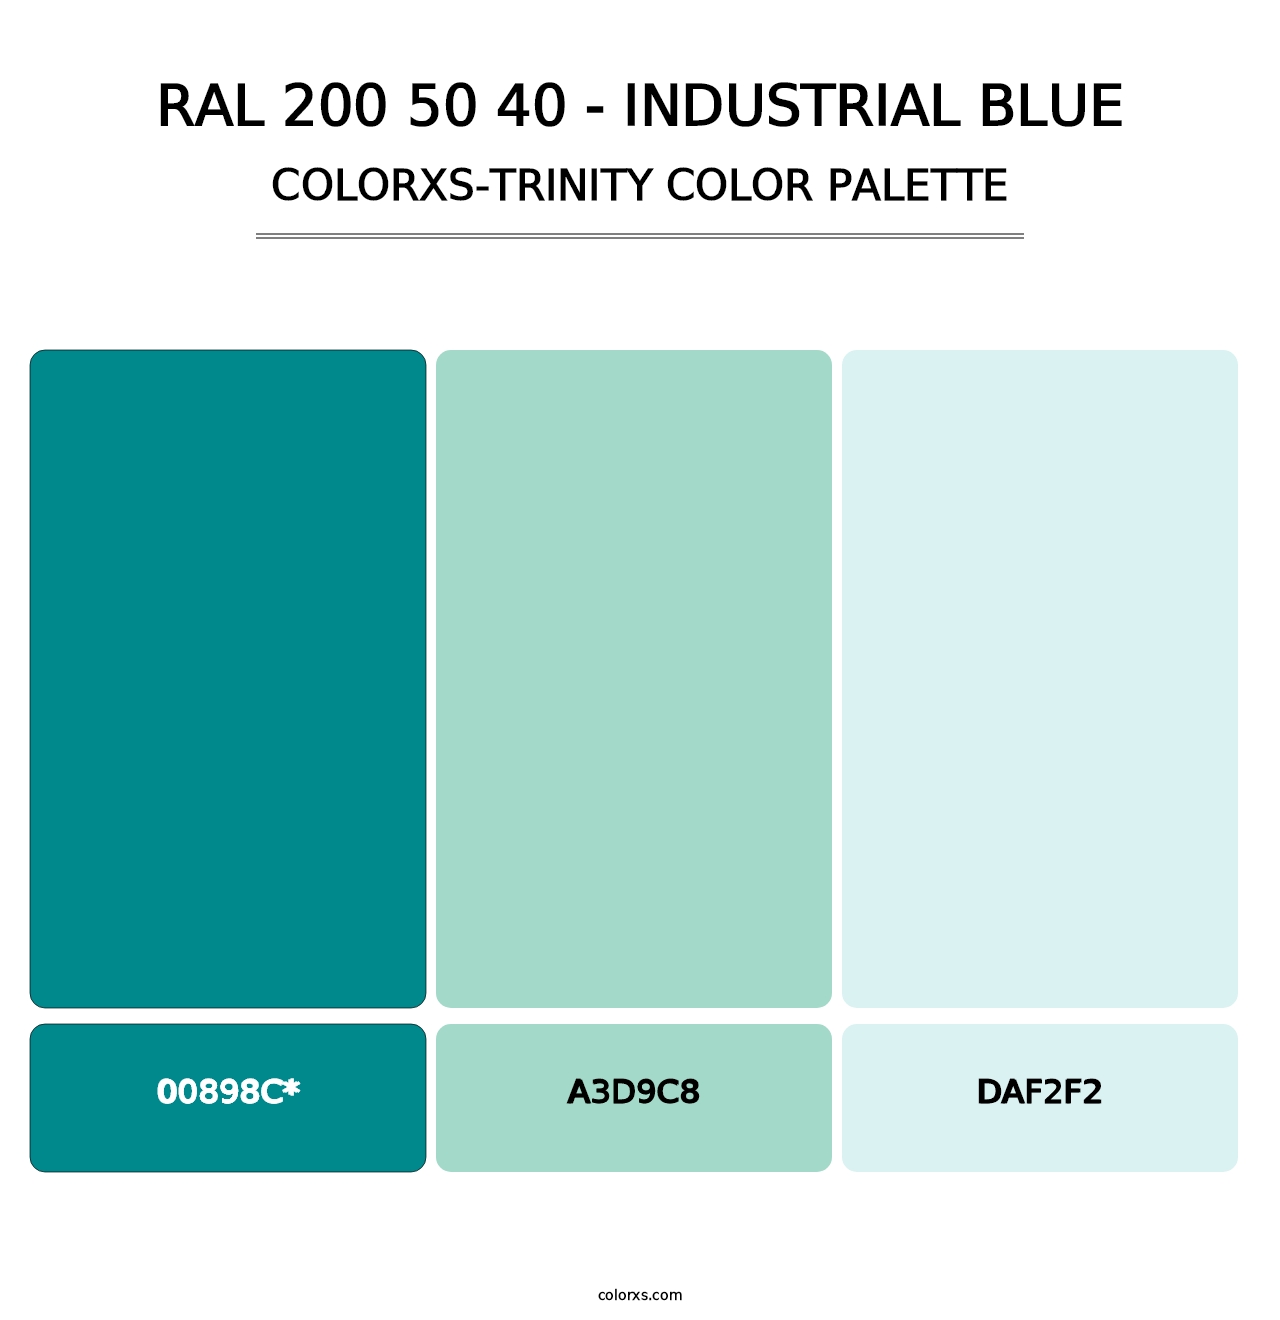 RAL 200 50 40 - Industrial Blue - Colorxs Trinity Palette